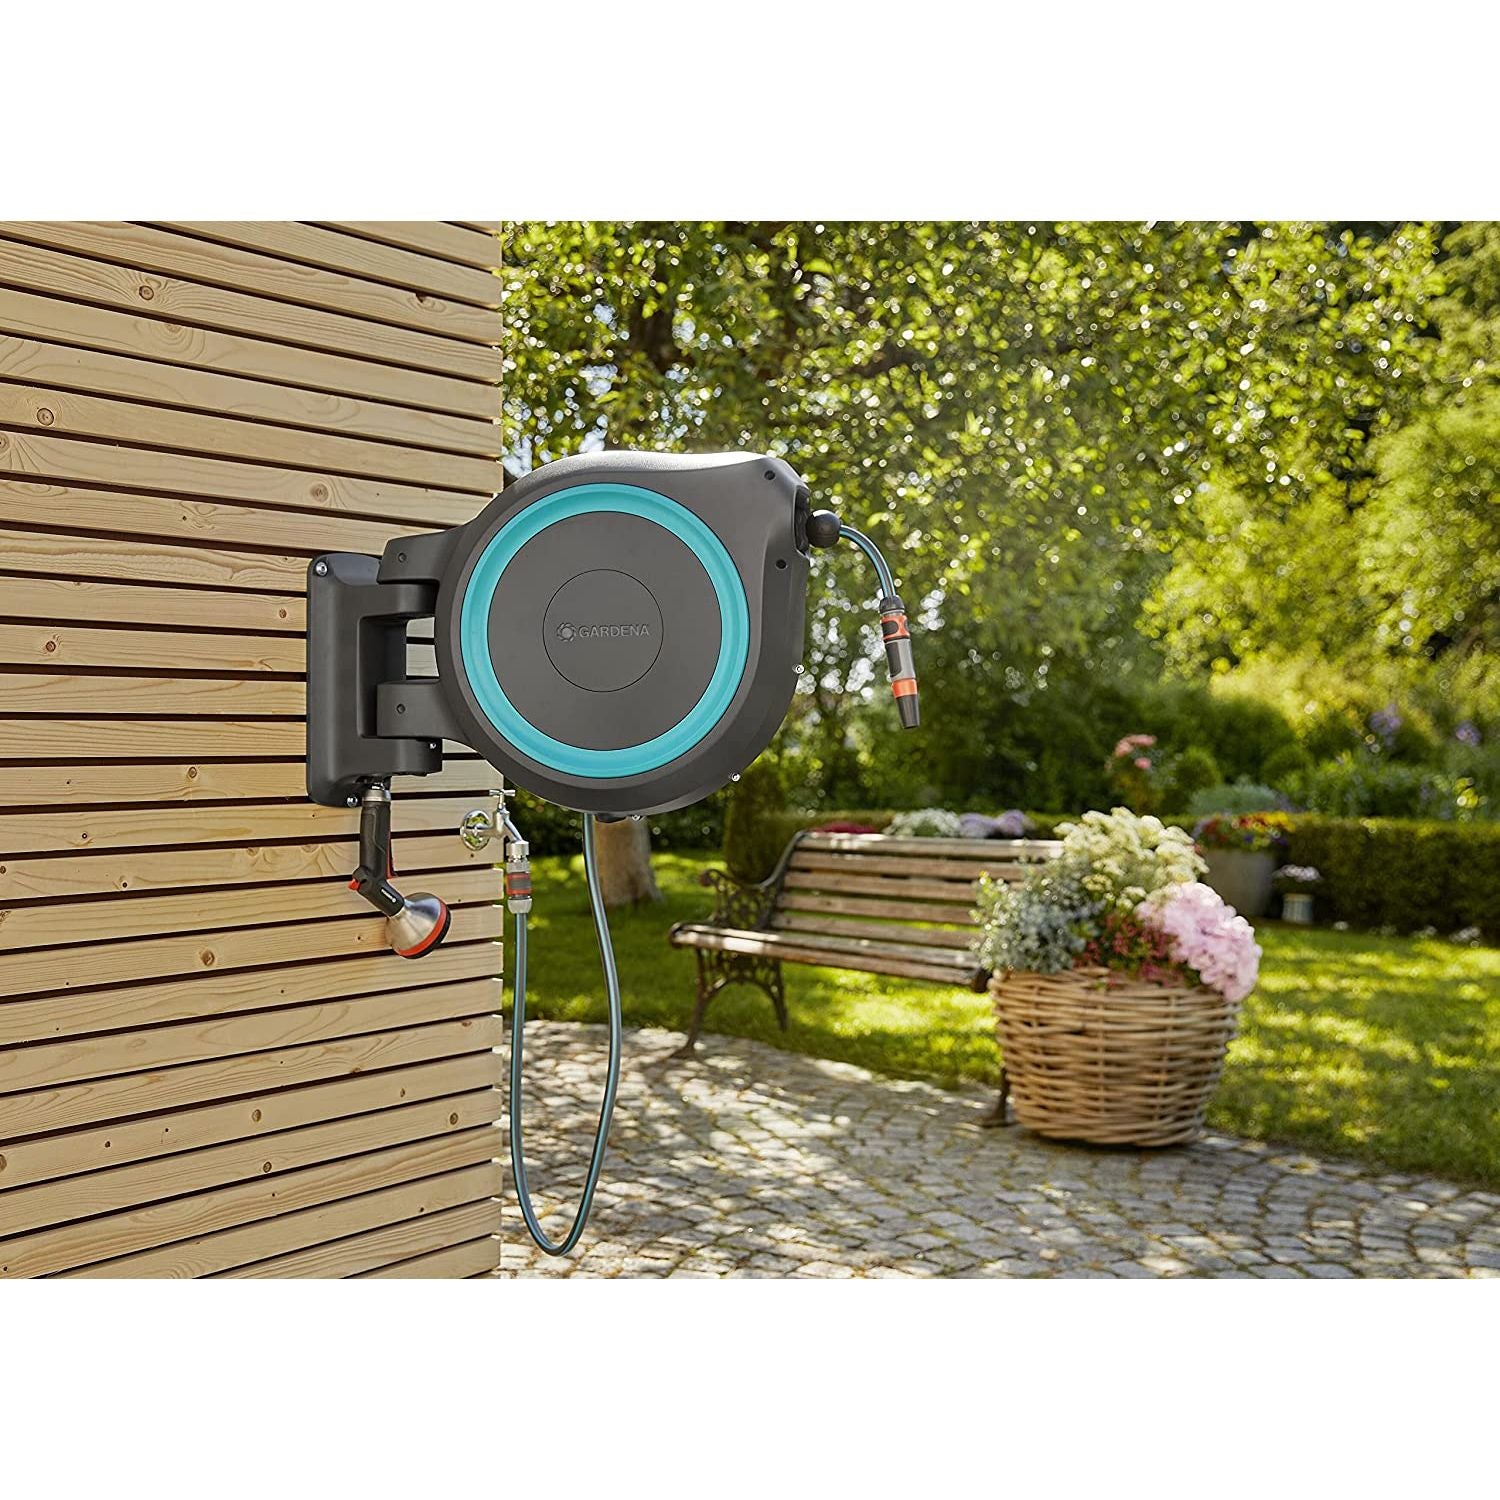 GARDENA 8050-83 Foot Wall Mounted Retractable Reel with Hose Guide